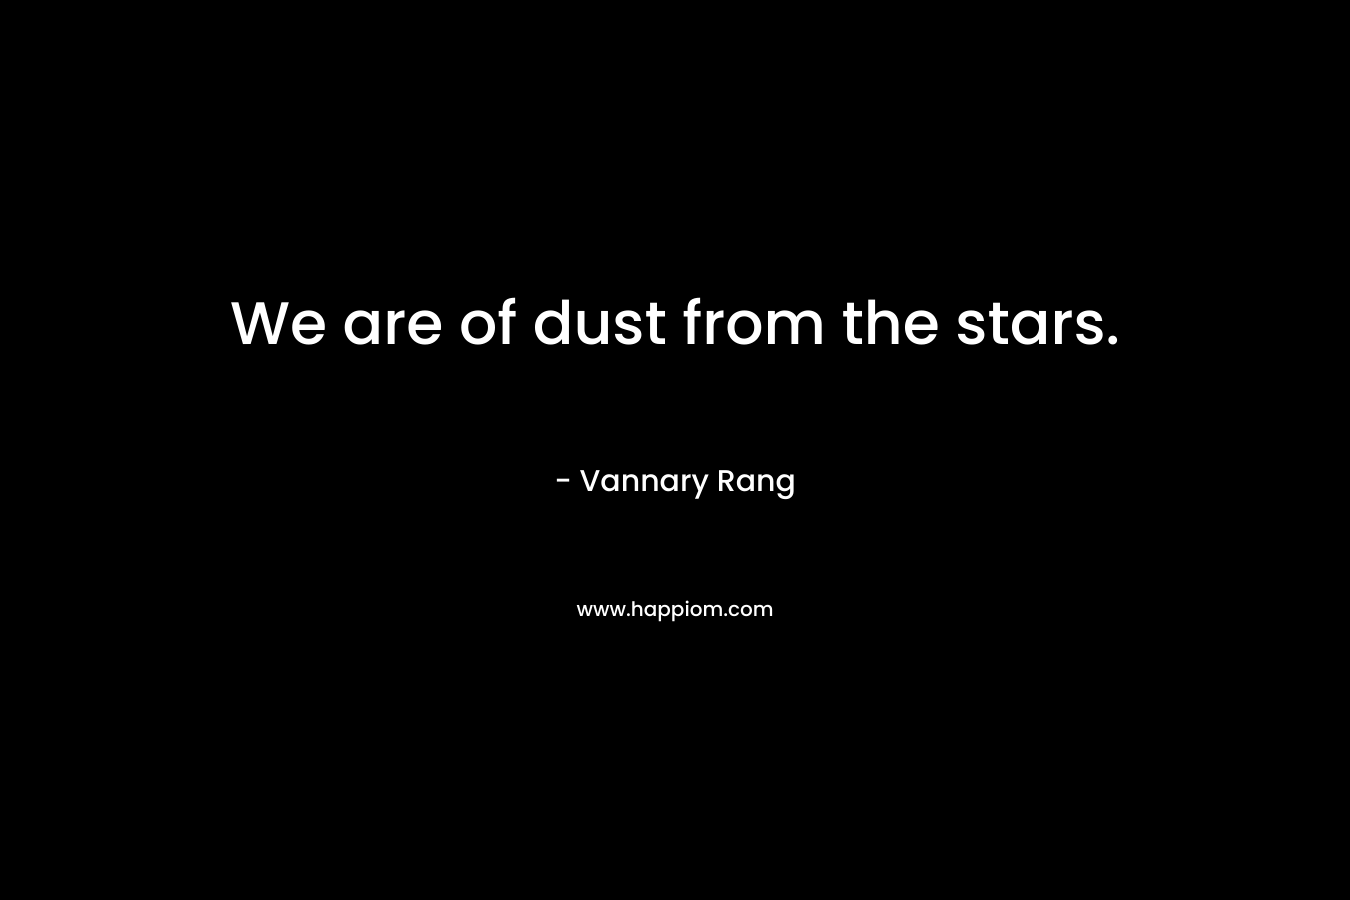 We are of dust from the stars. – Vannary Rang